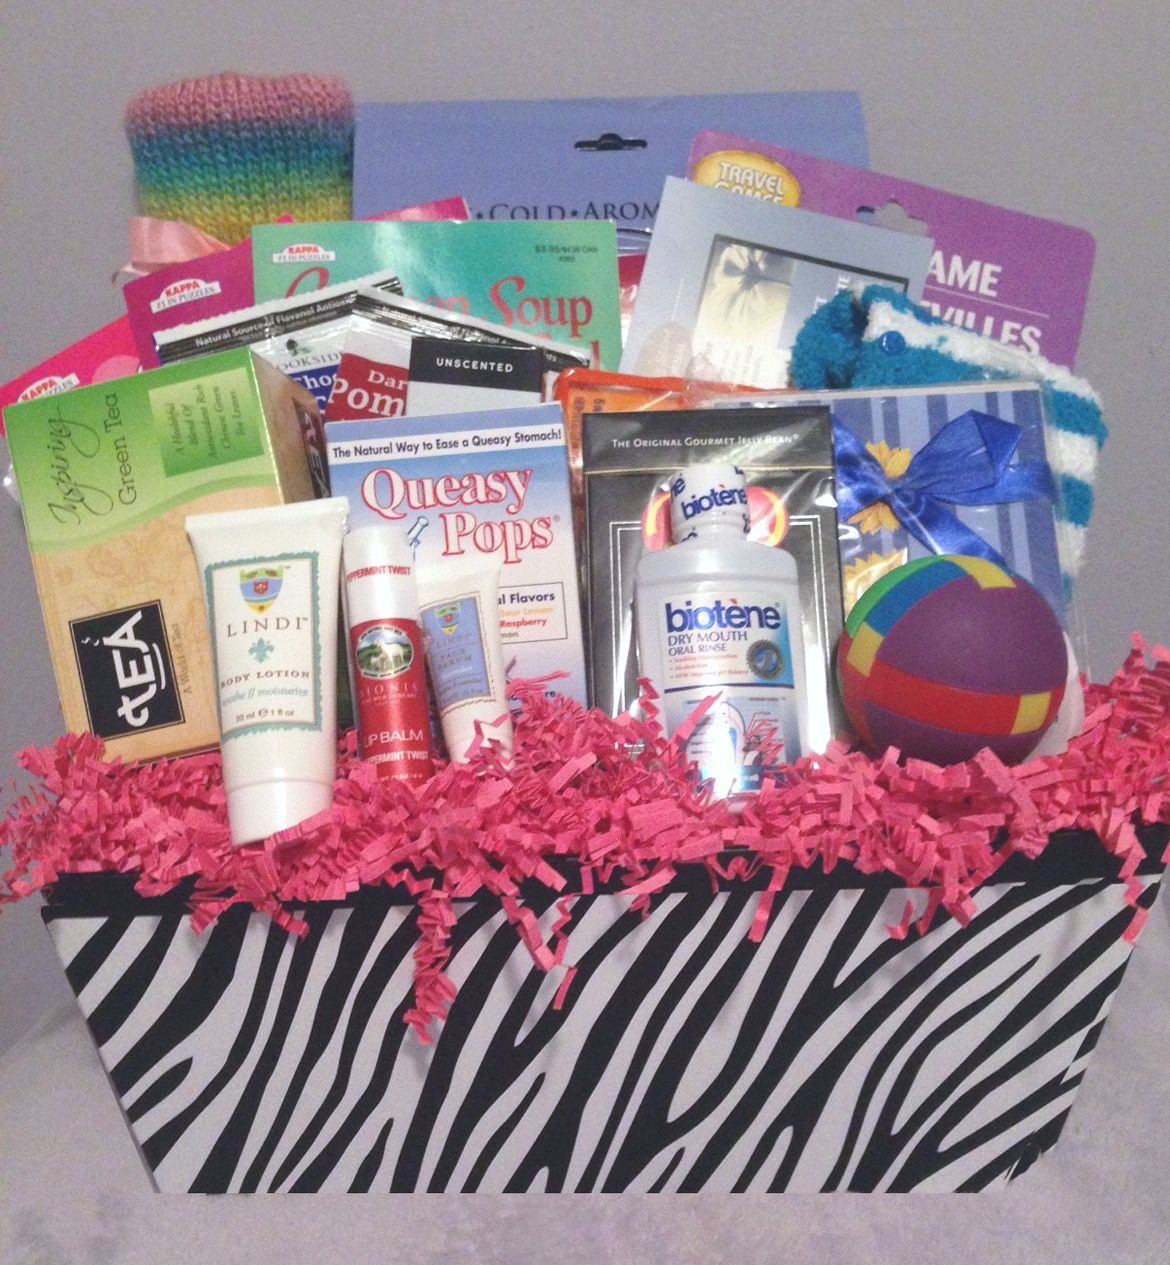 Gift Basket Ideas For Cancer Patients
 Women s Chemo Basket